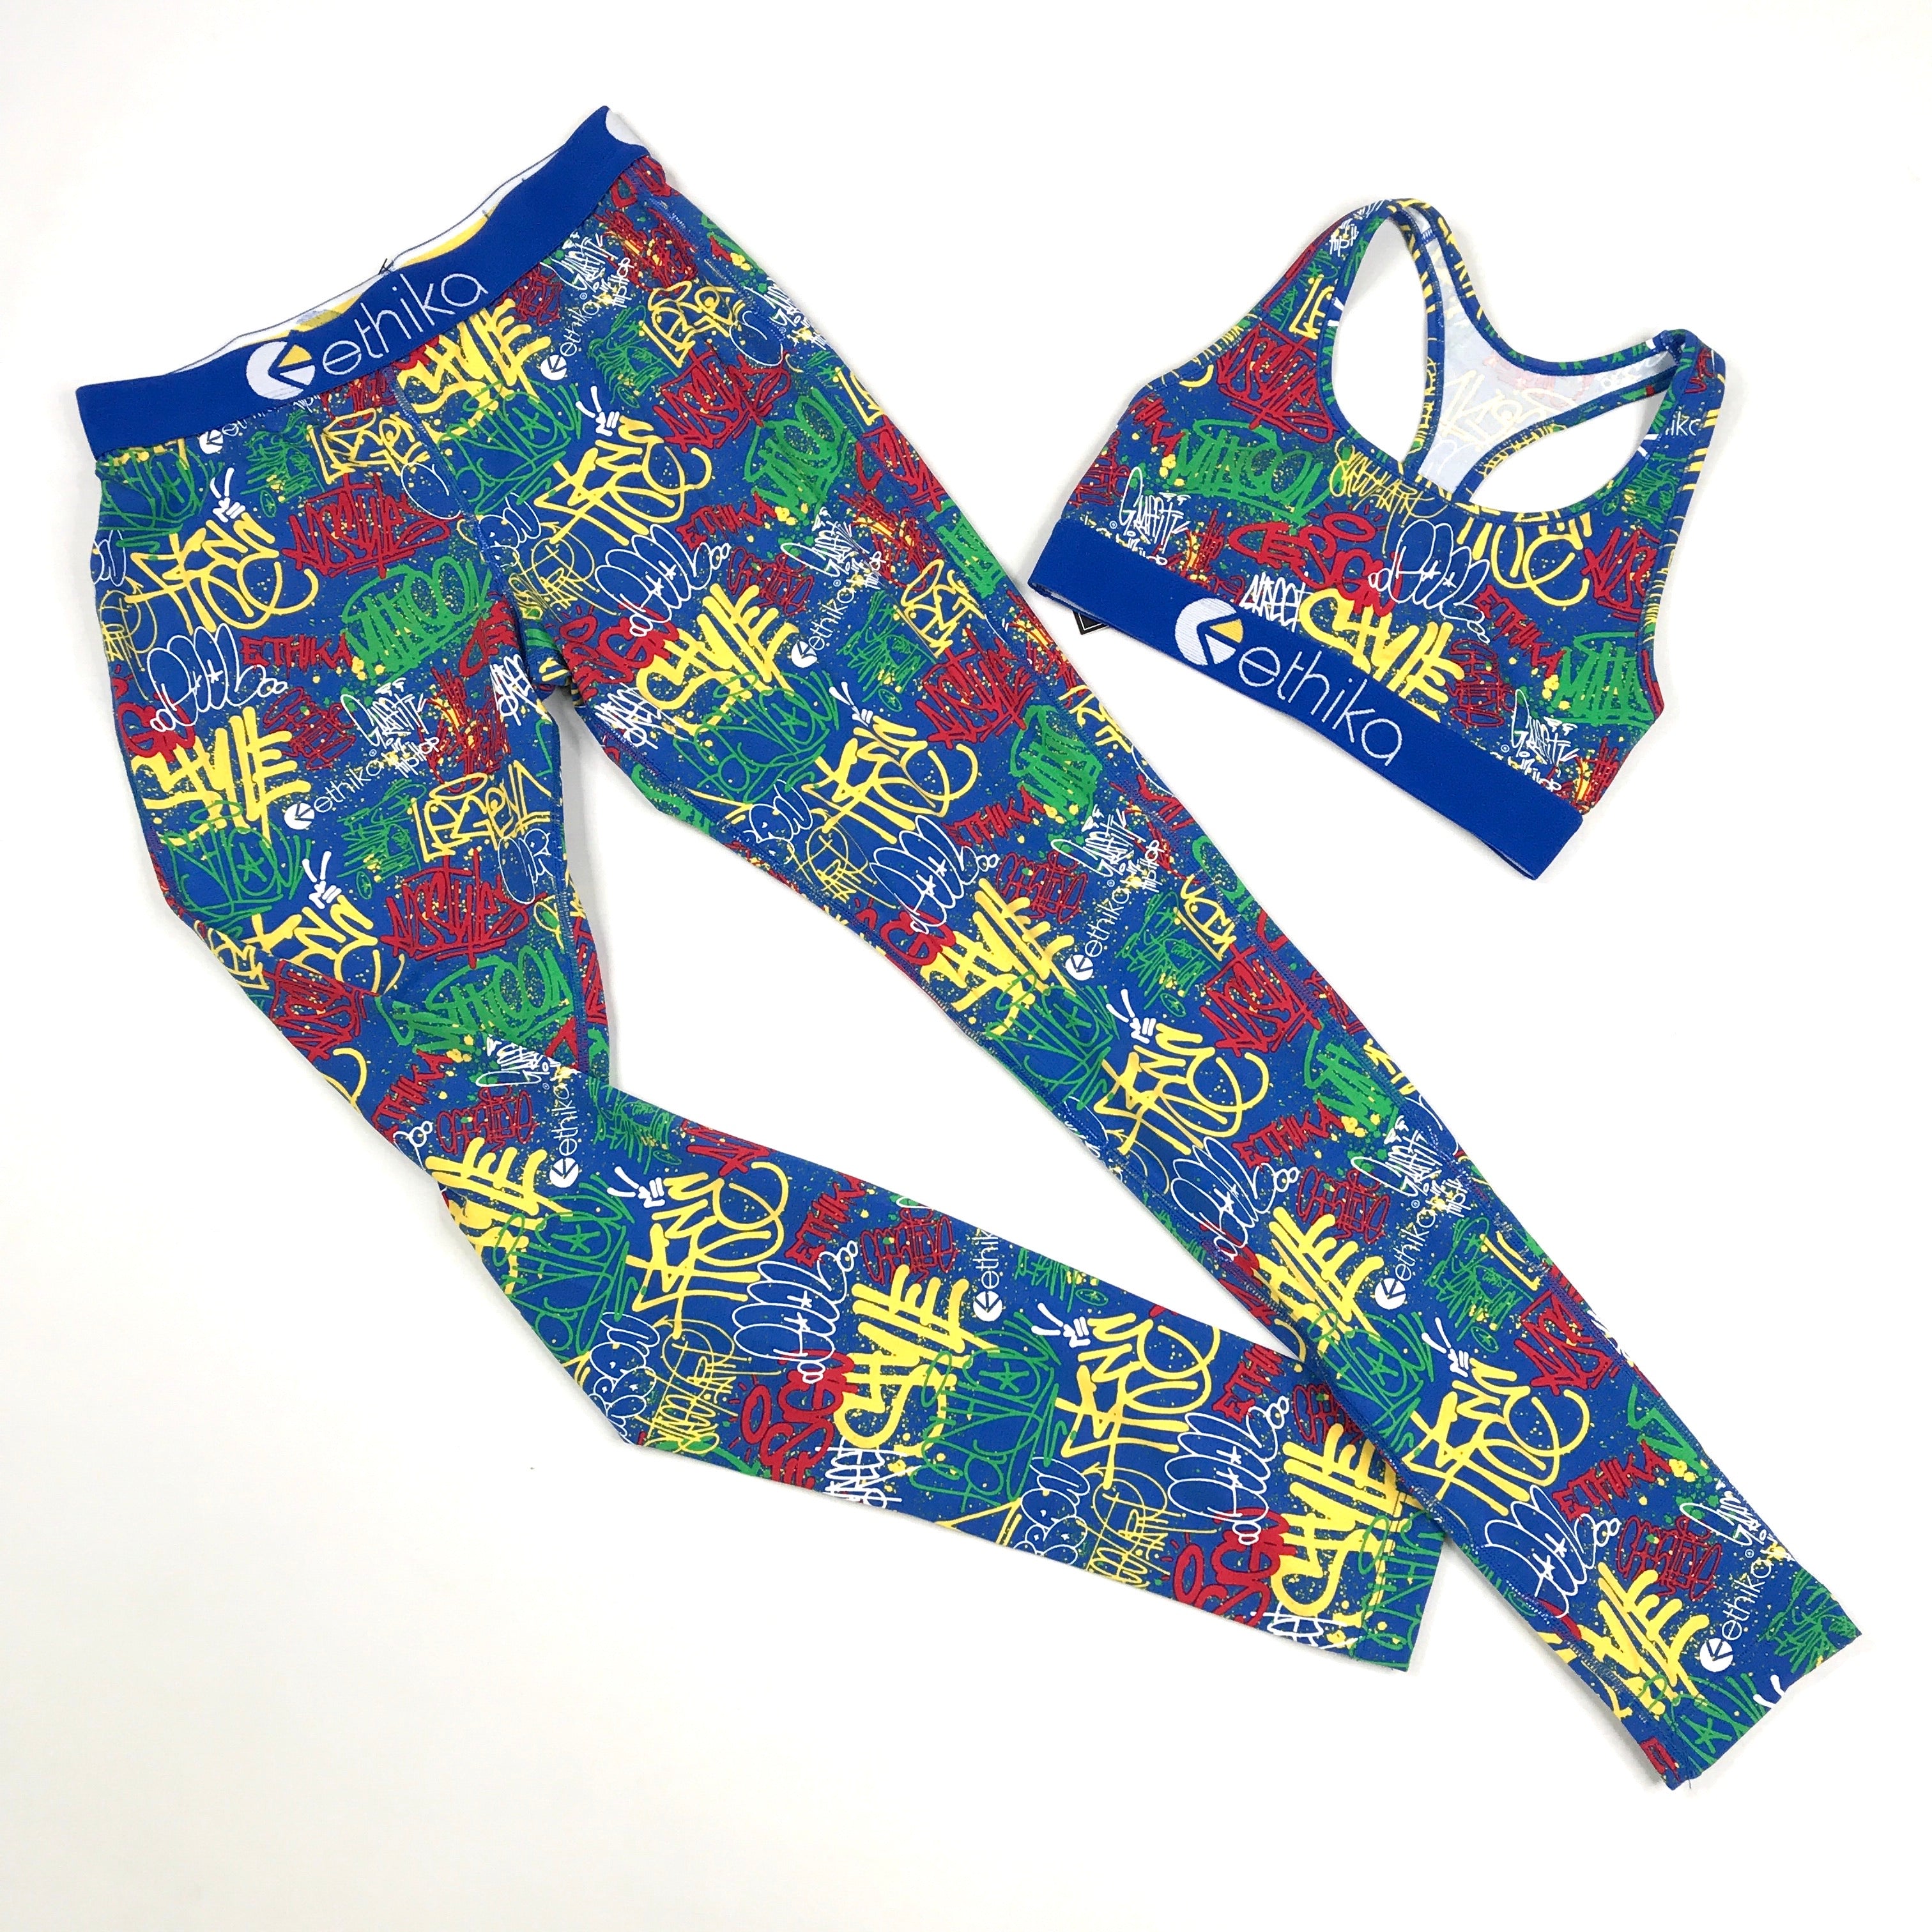 Ethika Leggings and sports bra set in Expression Session (wlus1291